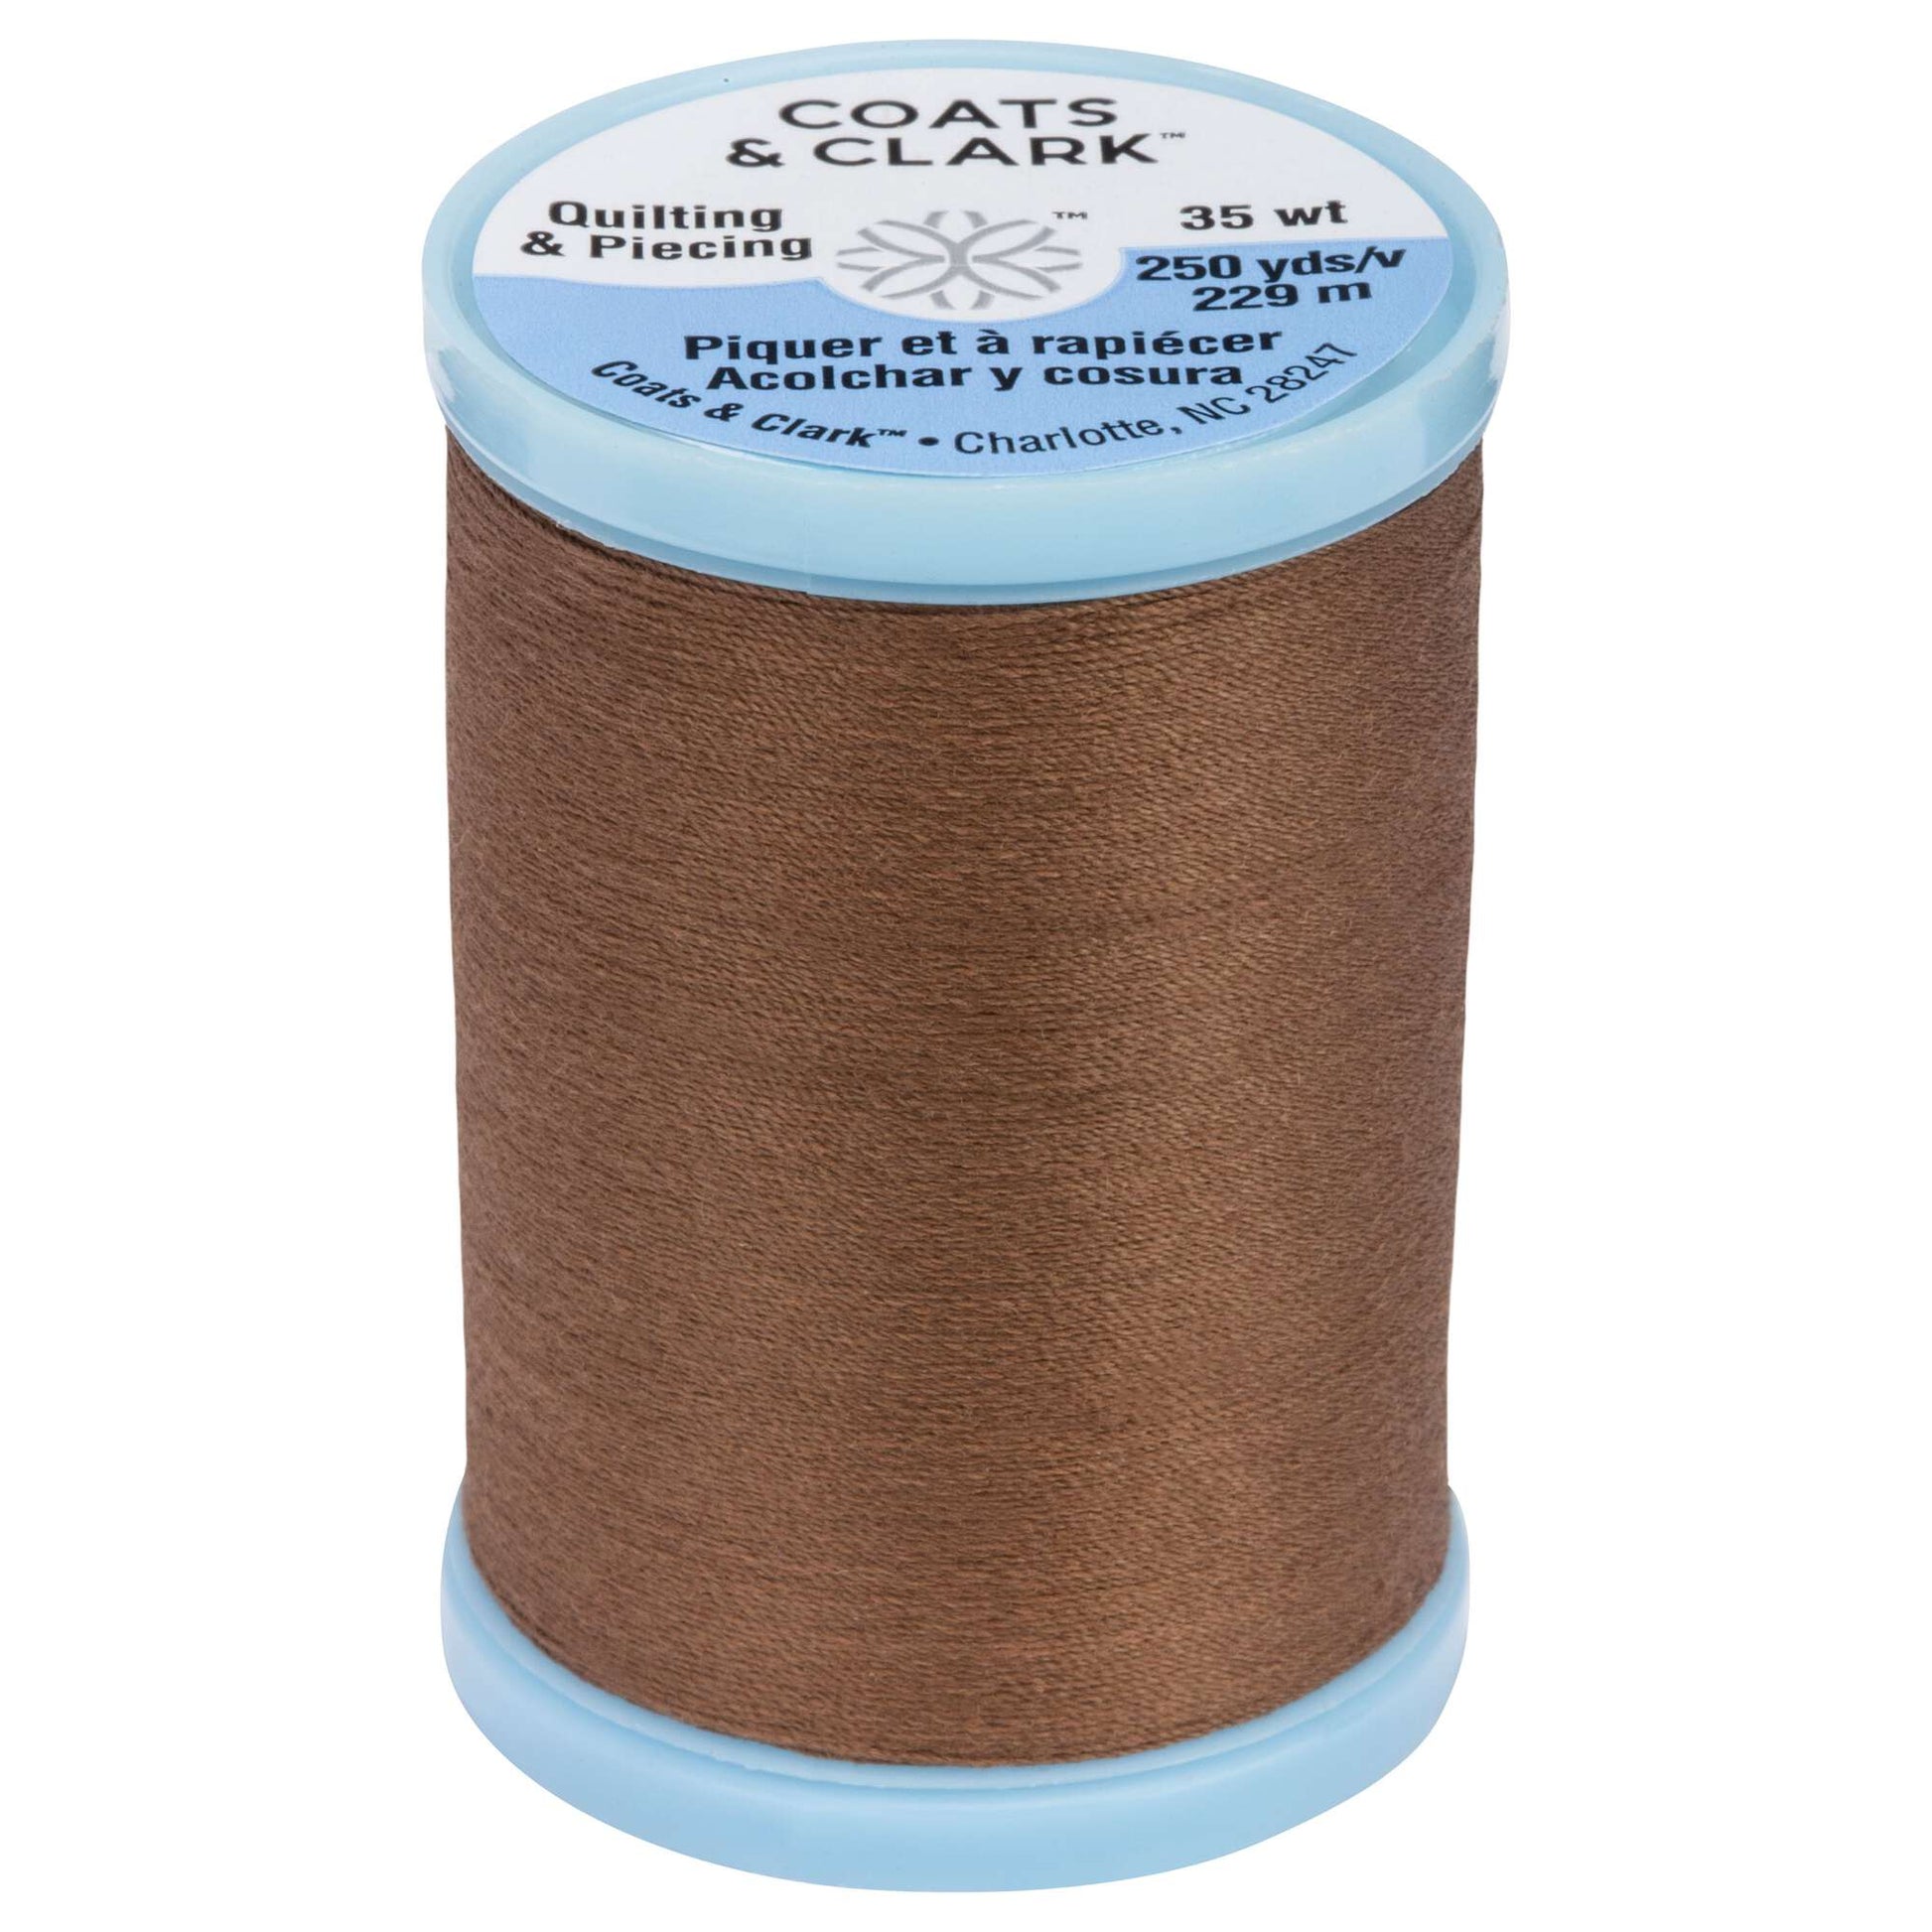 Coats & Clark Cotton Covered Quilting & Piecing Thread (250 Yards) Summer Brown